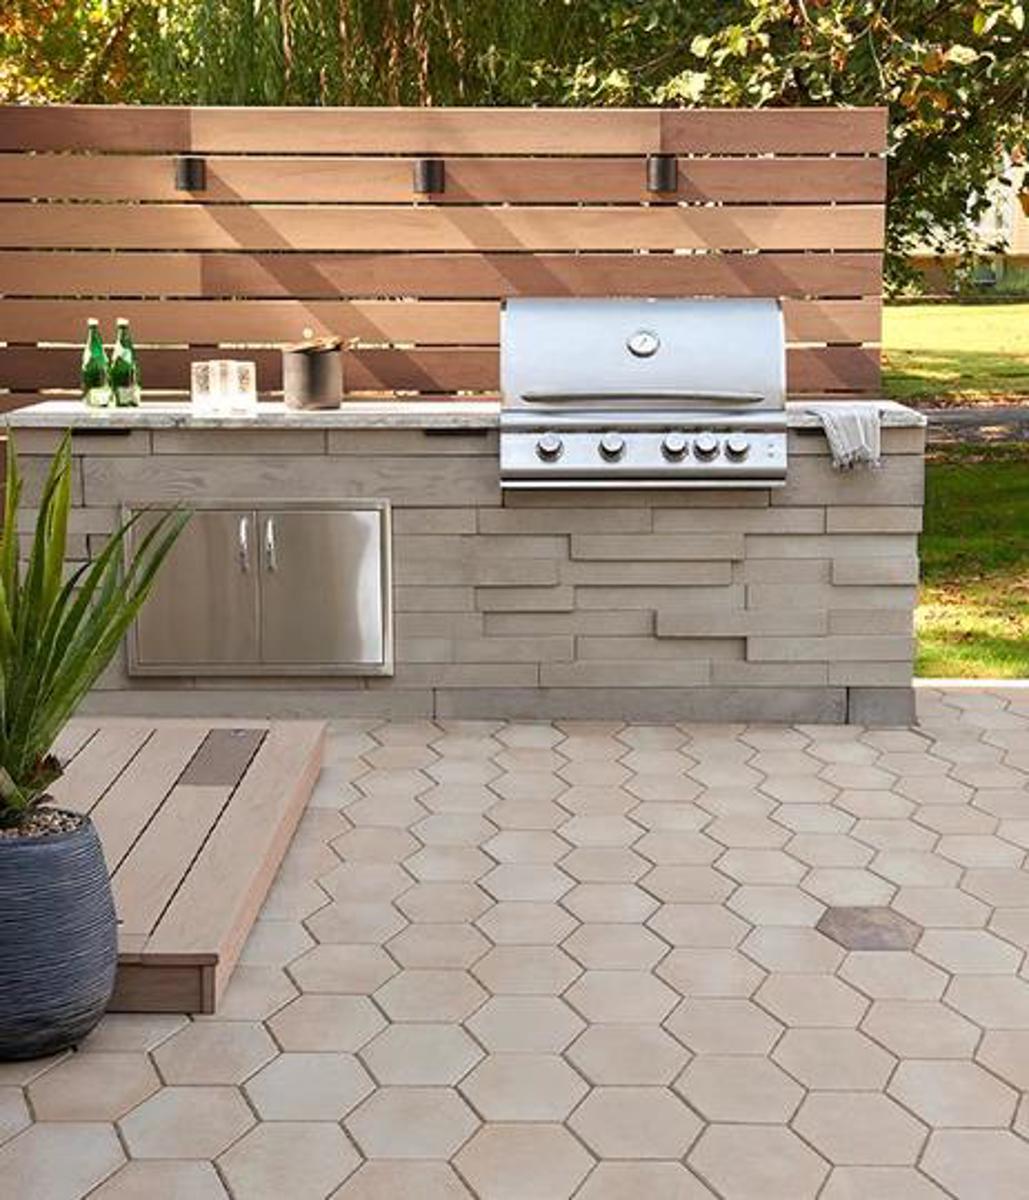 Techo bloc by space 5 outdoor kitchens bbq grill backyard patio walls slabs beige brown 1 new